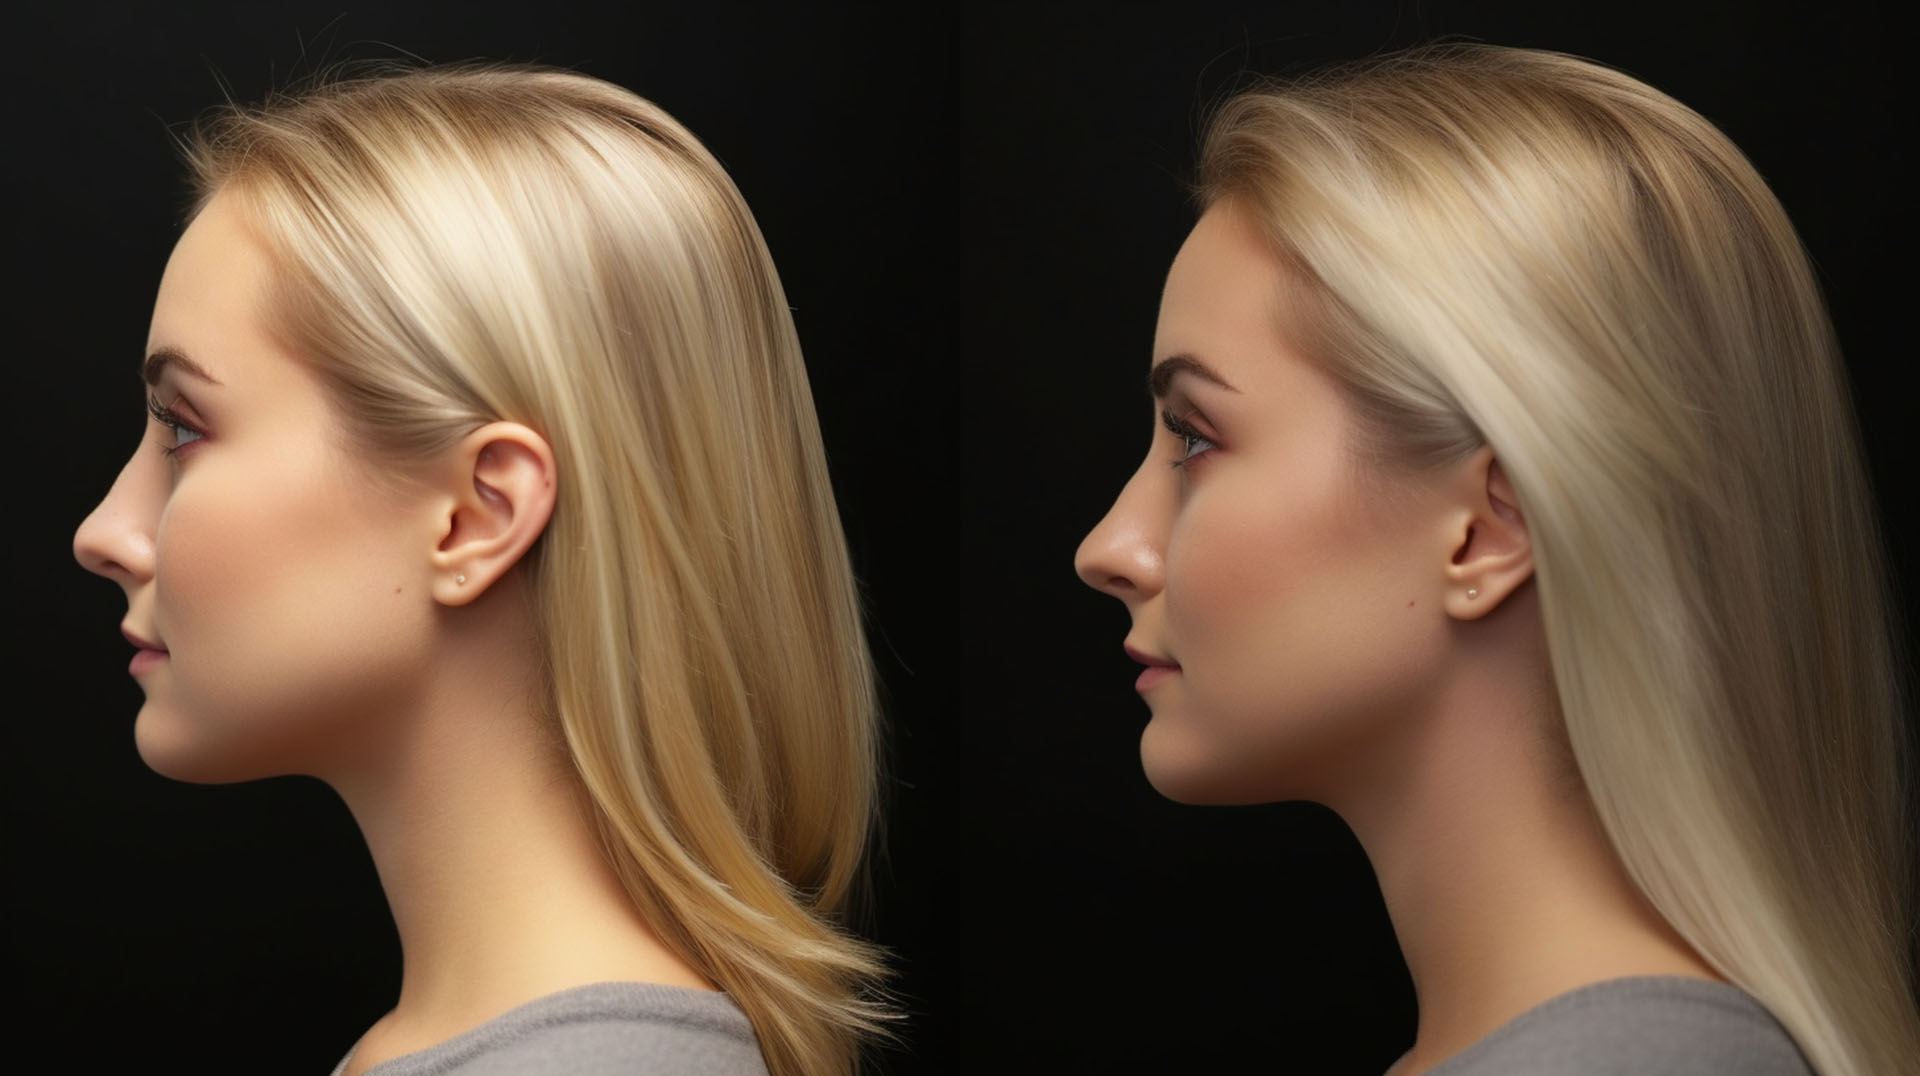 Rhinoplasty Before and After Photo St. Thomas